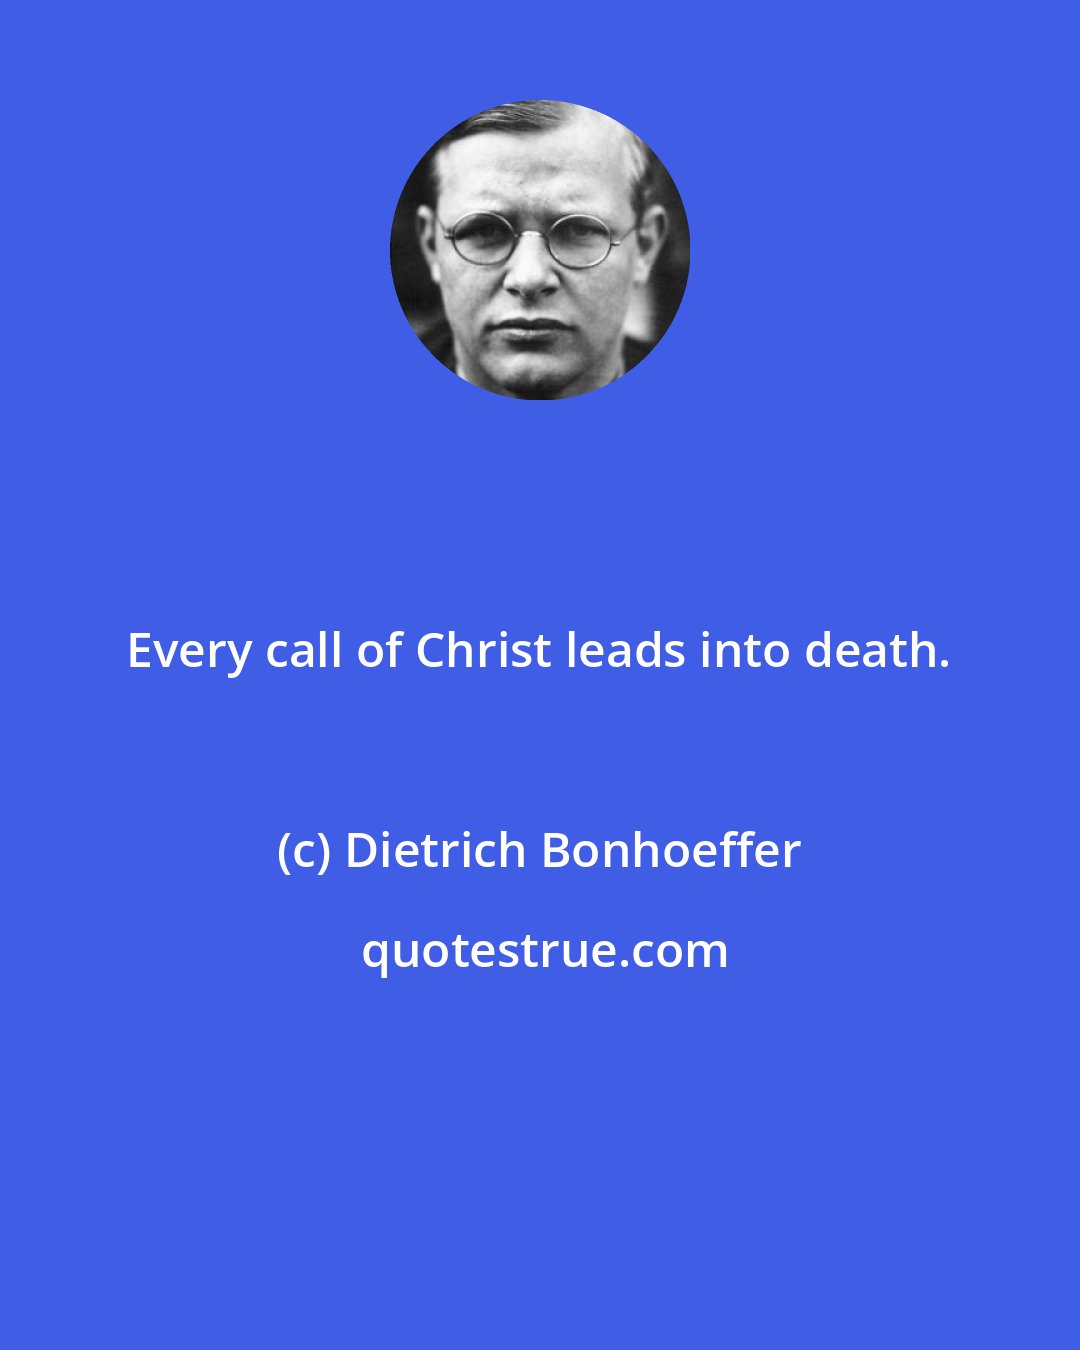 Dietrich Bonhoeffer: Every call of Christ leads into death.